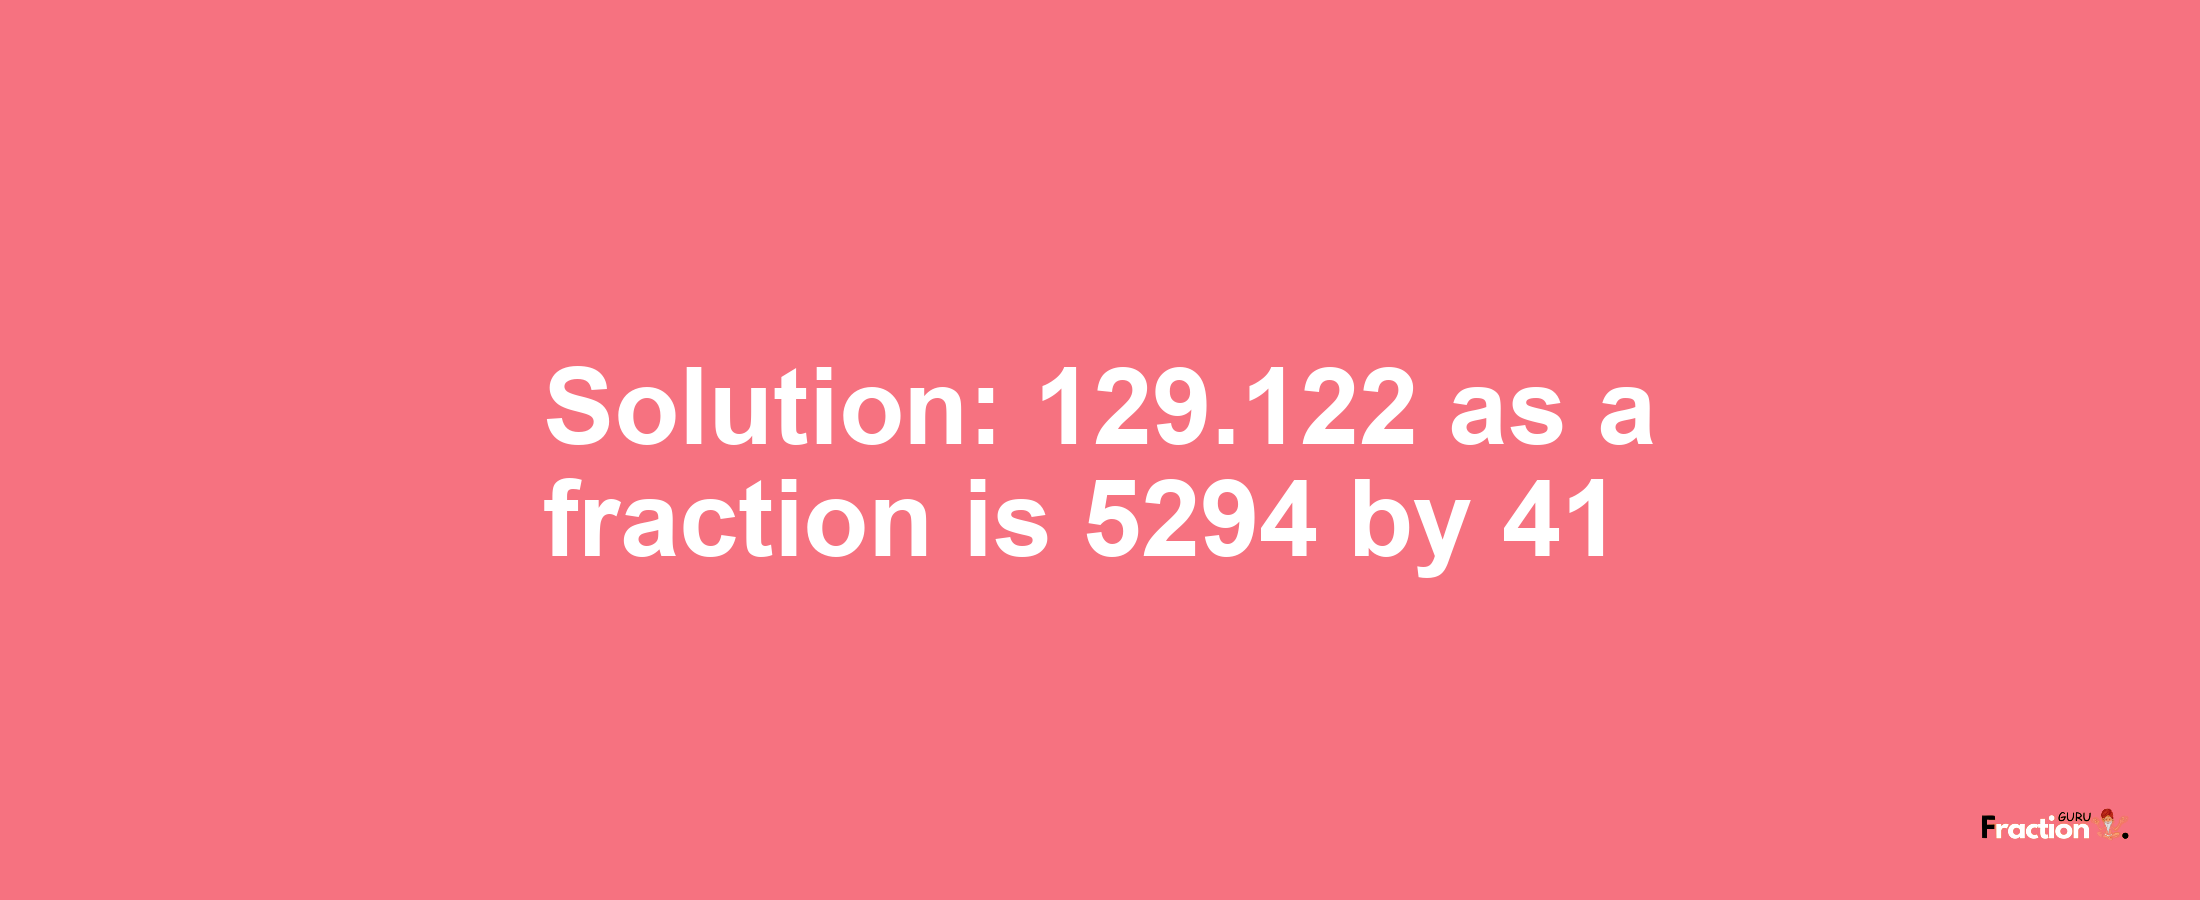 Solution:129.122 as a fraction is 5294/41